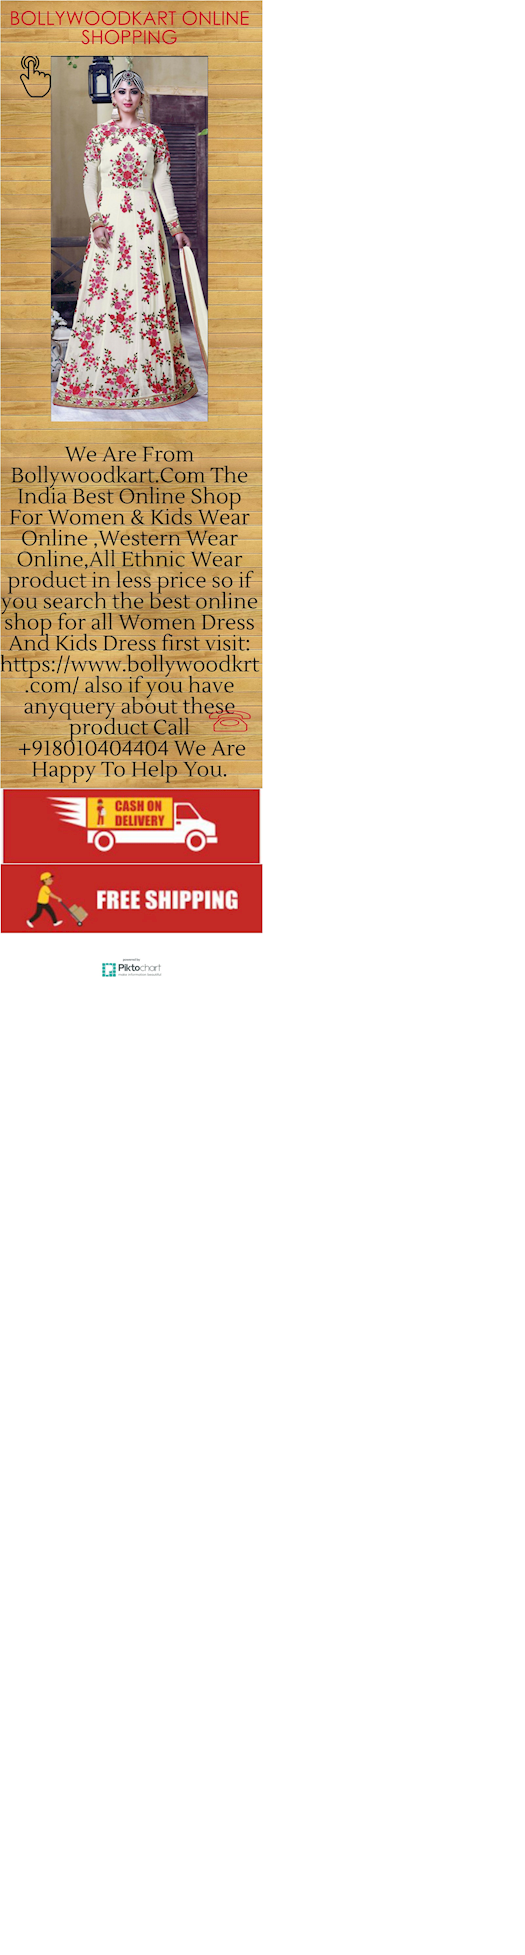 Best Online Shopping Site in India